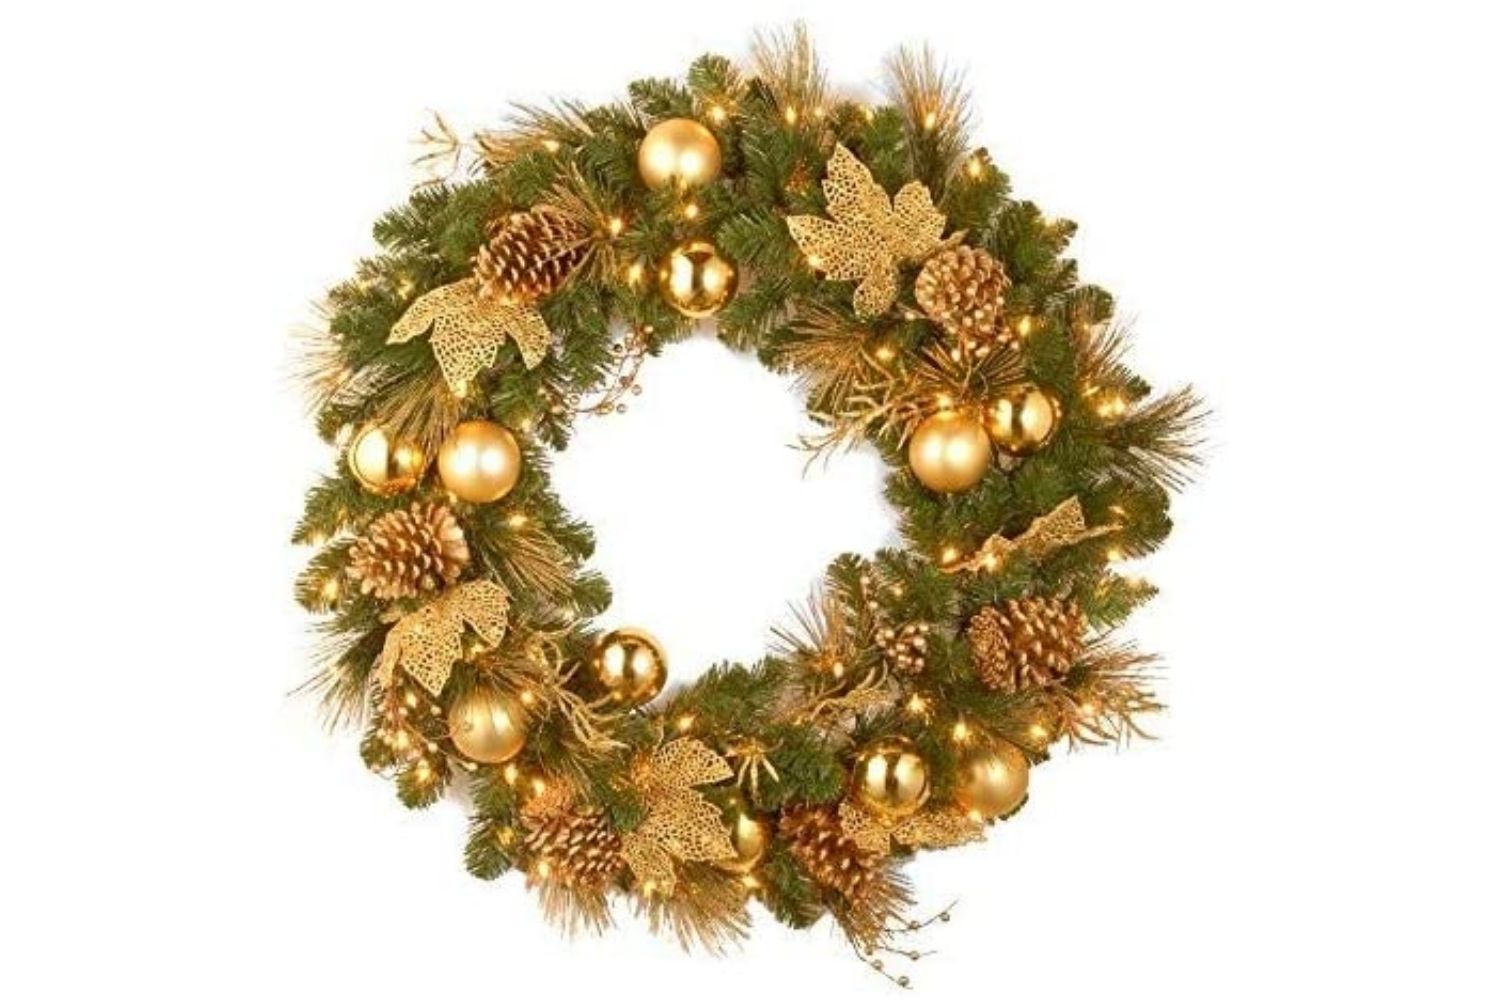 The Best Christmas Wreaths Option: National Tree Company lit Artificial Christmas Wreath